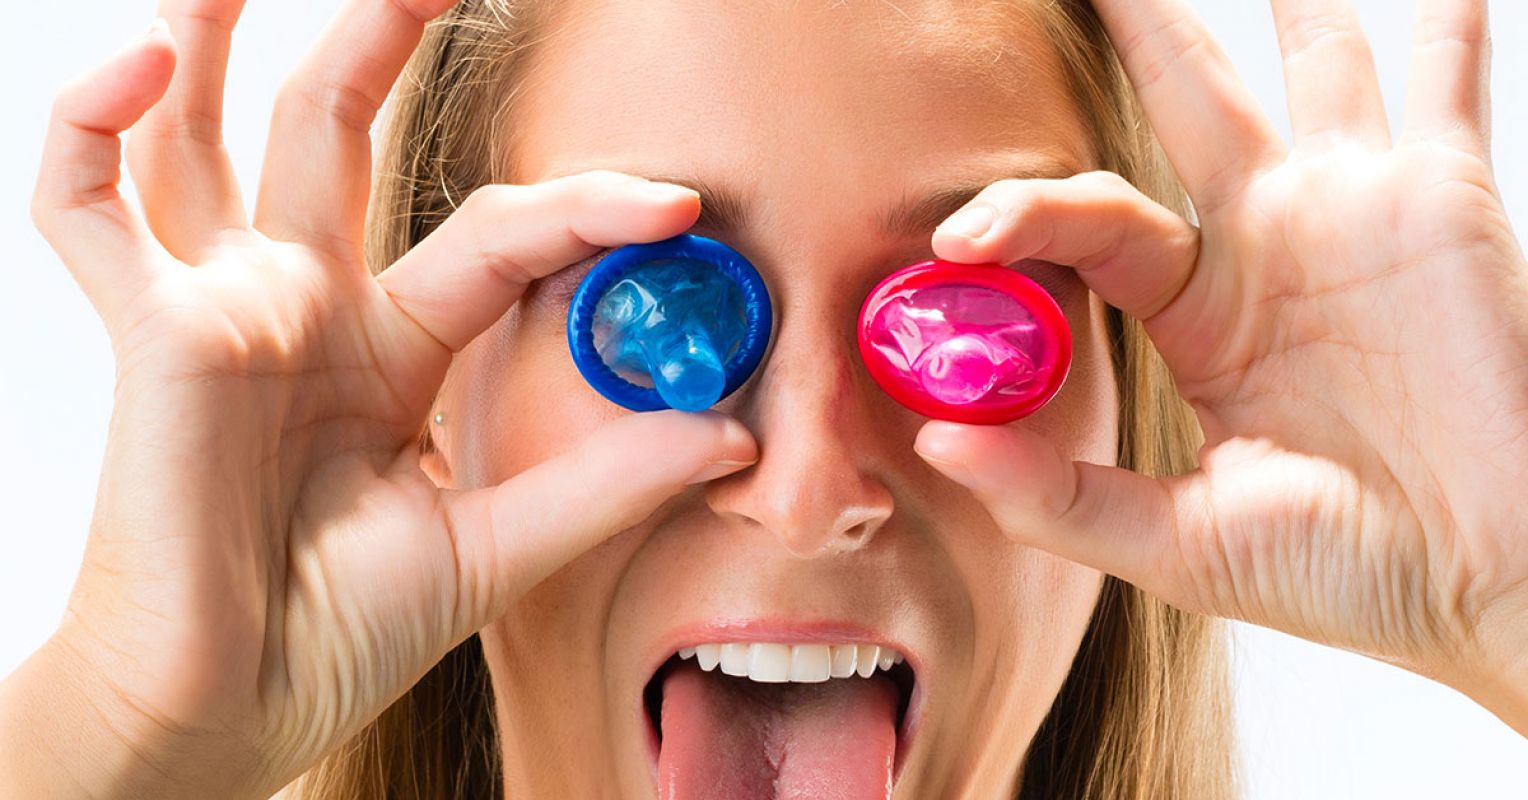 I Hate Condom Porn Videos - Women Don't Like How Condoms Feel Any More Than Men Do | Psychology Today